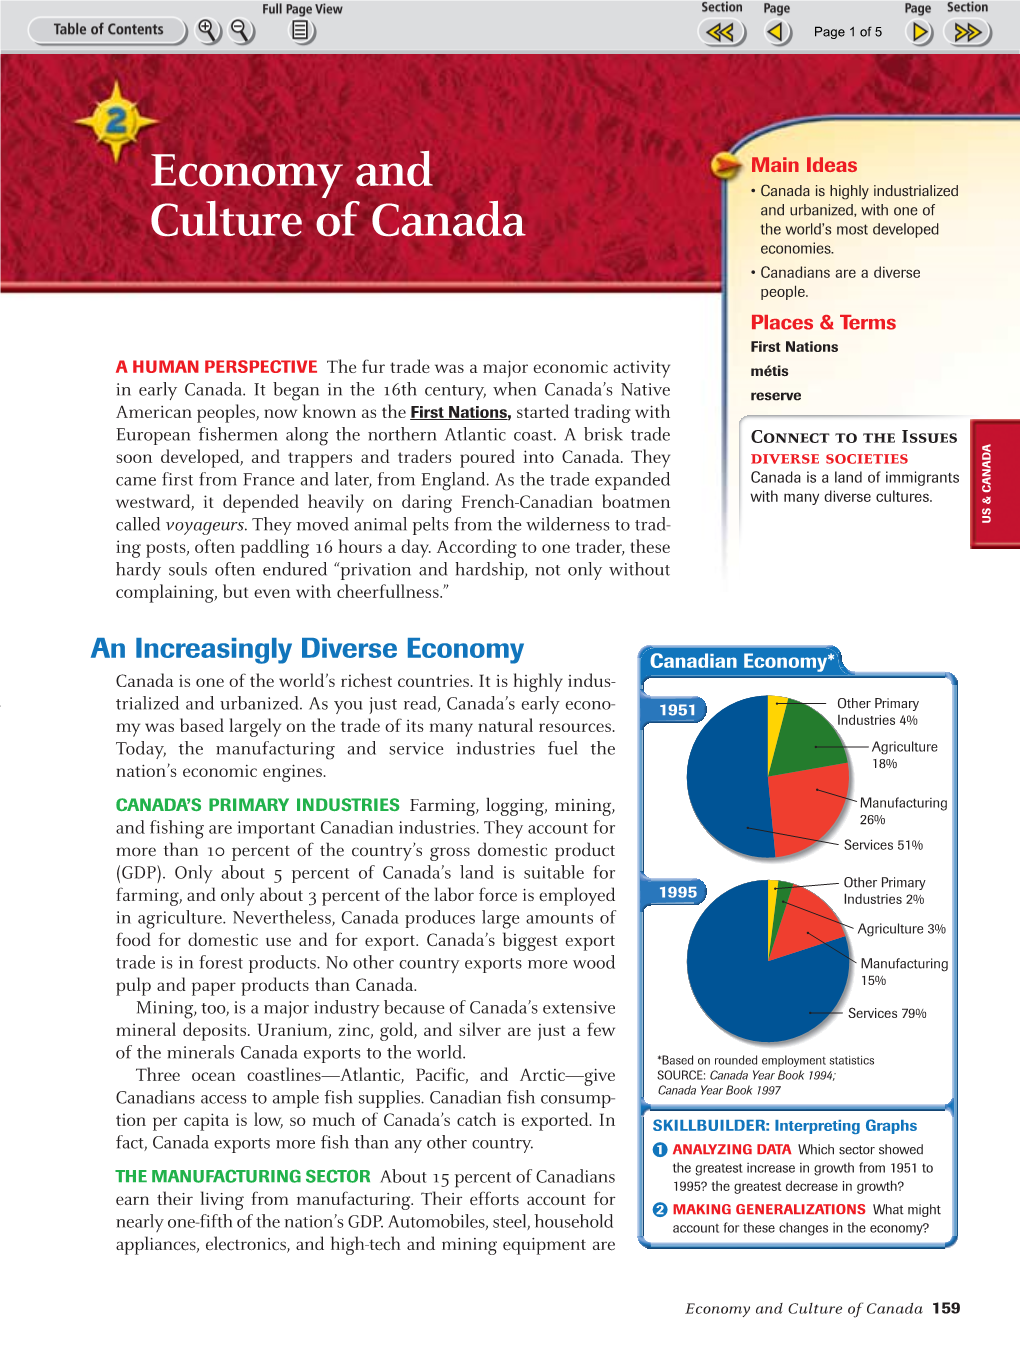 Economy and Culture of Canada 159 159-163-Chapter7 10/16/02 10:20 AM Page 160